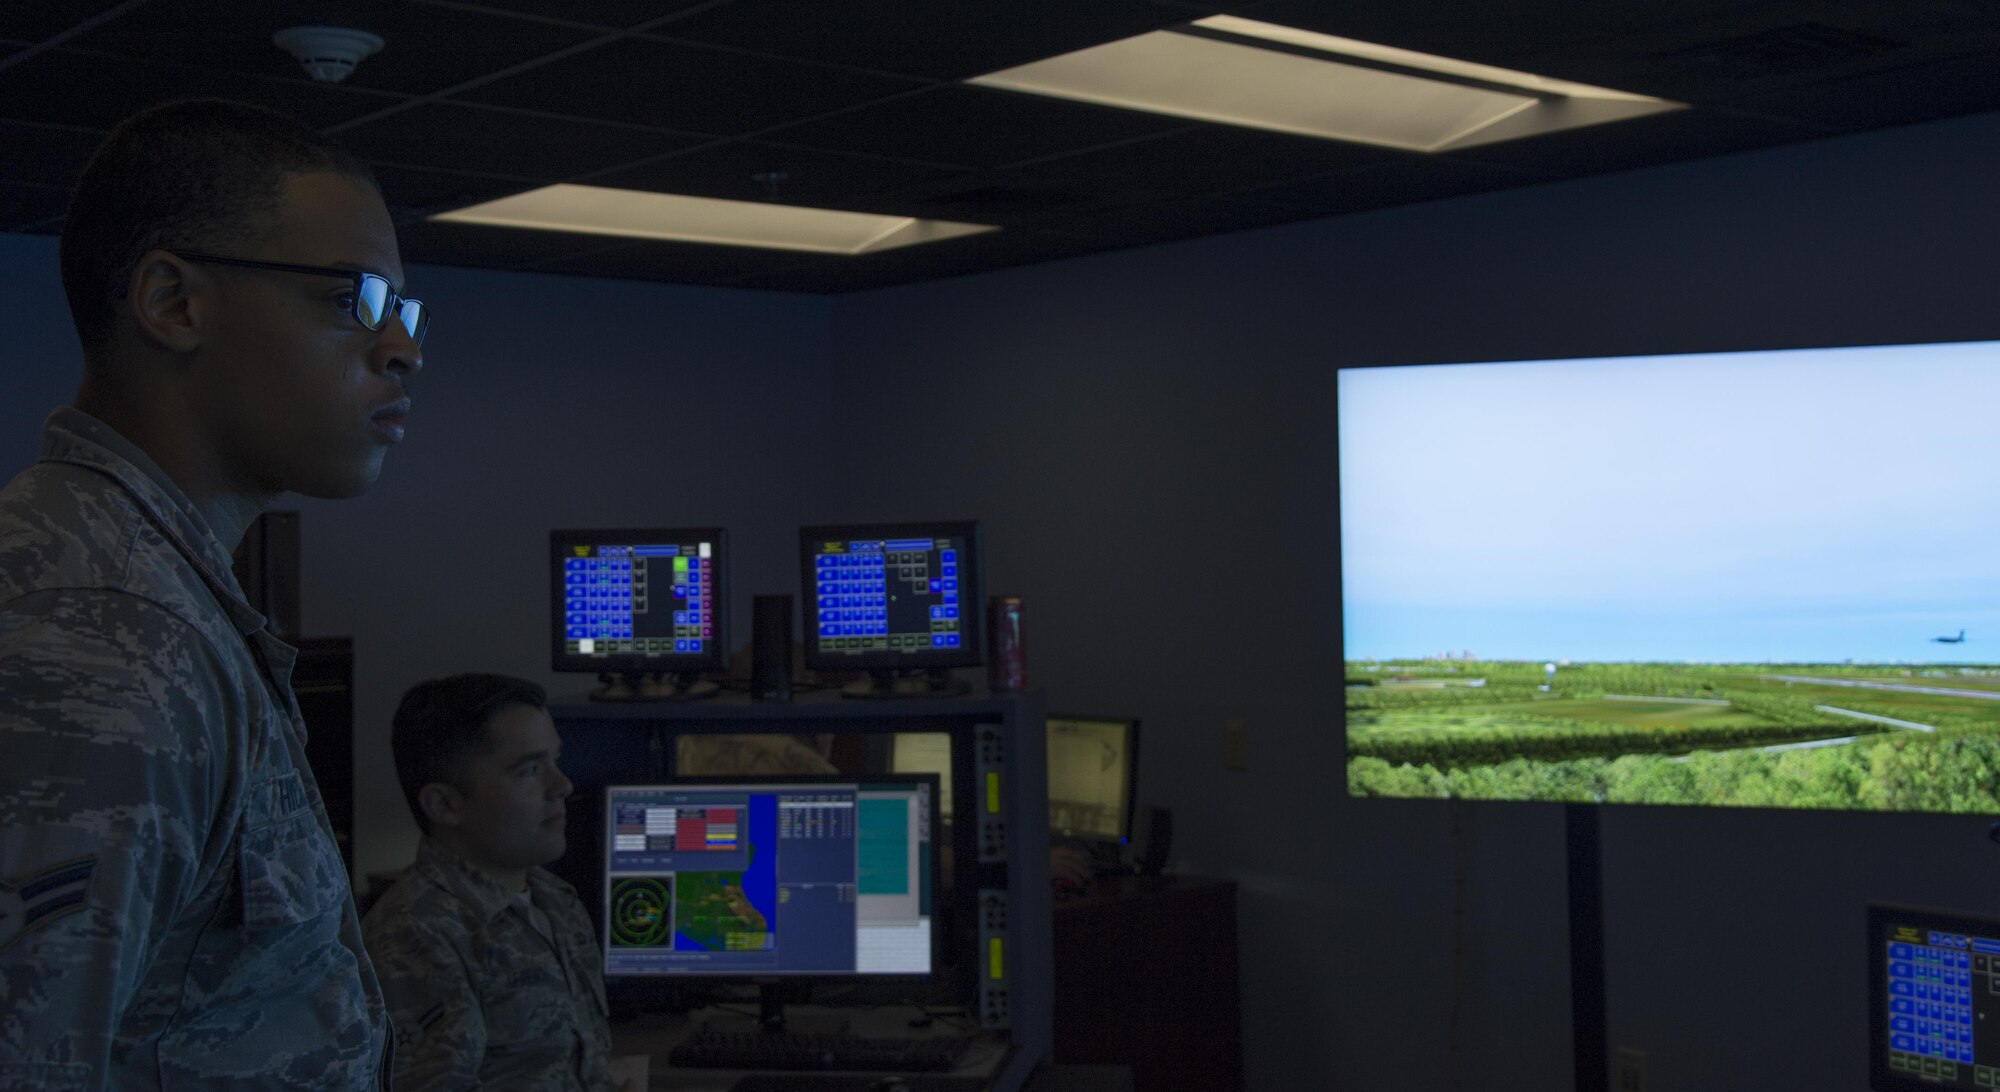 U.S. Air Force Airman 1st Class Keith Hickson Jr., left, a cable and antenna maintenance technician assigned to the 6th Communications Squadron, observes a simulation in the air traffic control tower during a Shadow Program at MacDill Air Force Base, Fla. Oct. 18, 2017. The MacDill Shadow Program was created to help Airmen gain a greater perspective into another career field and how each Airman and unit factors into the Air Force mission. (U.S. Air Force photo by Senior Airman Mariette Adams)